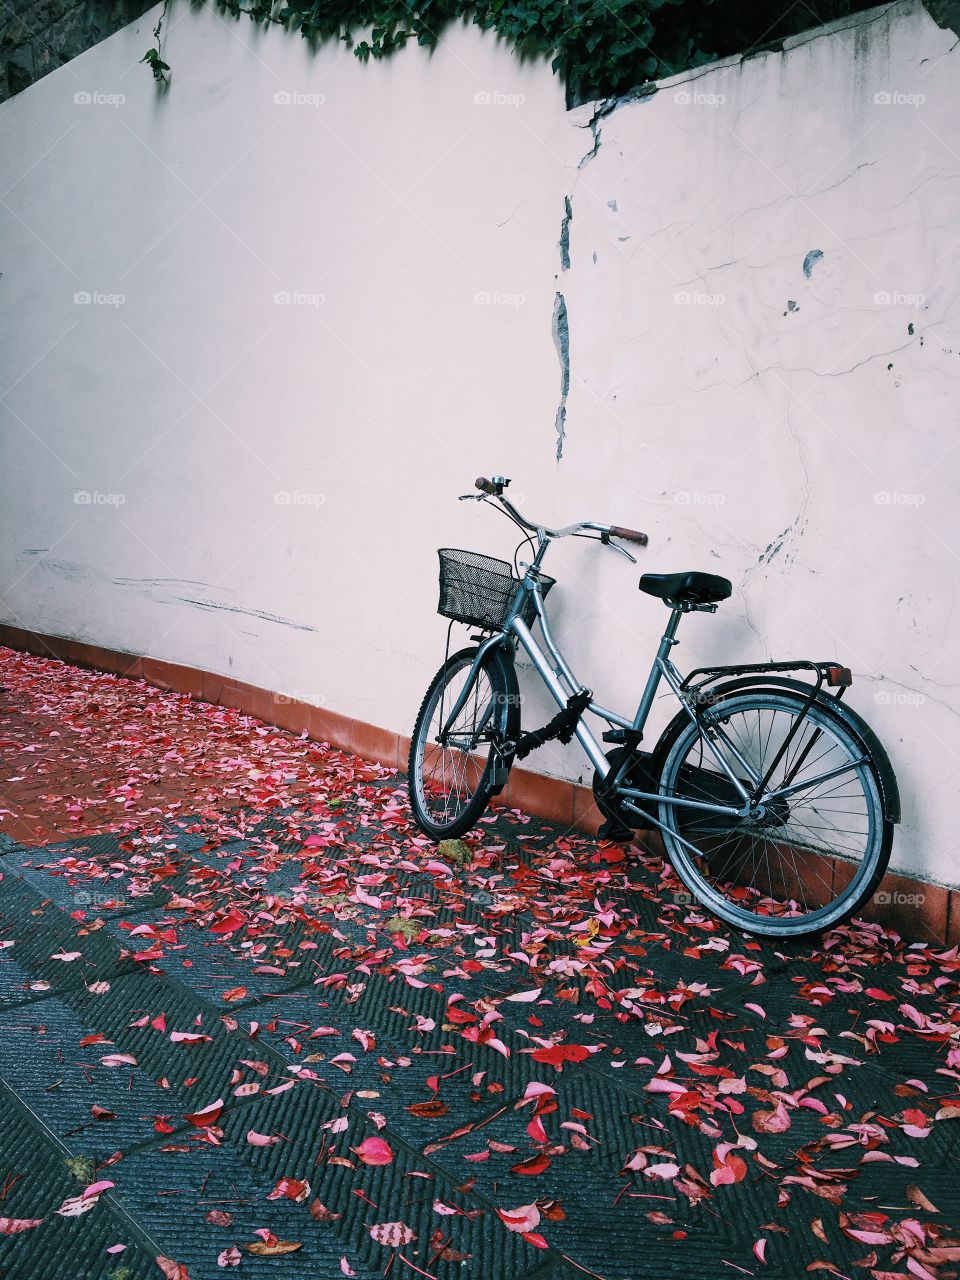 Bicyckes in Autumn. Sampling Fall colours, a bycicle parked against a blank wall and red magical small dead leaves laying on the stone floor